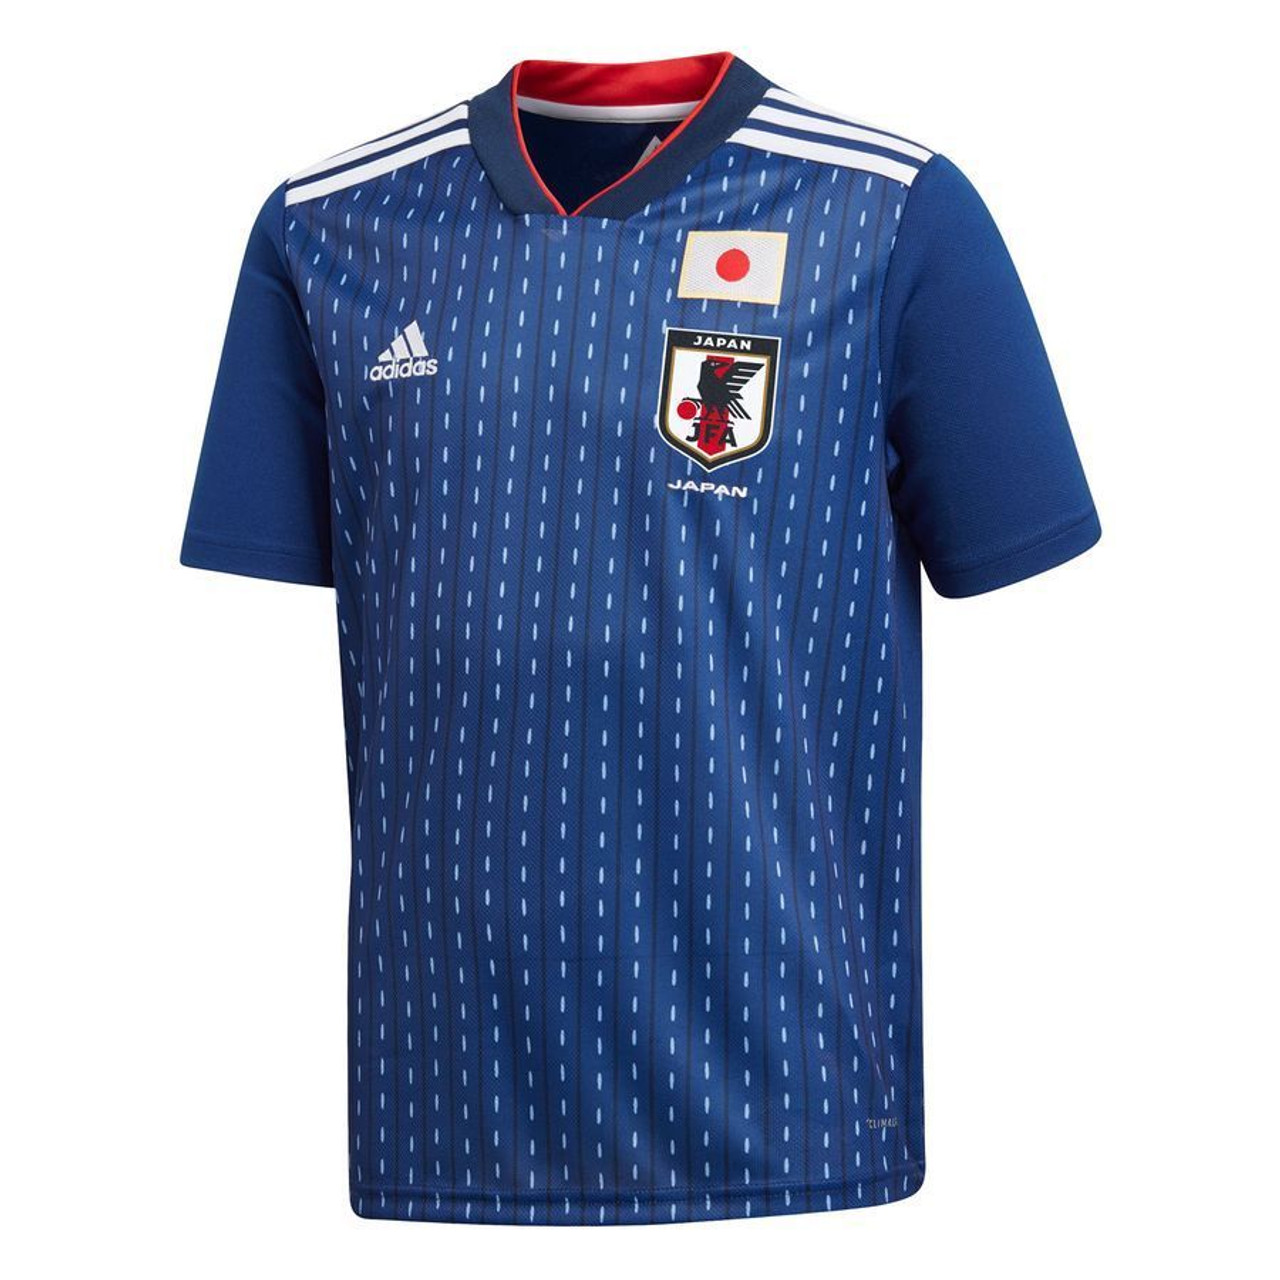 ADIDAS JAPAN 2018 WORLD CUP BOYS HOME JERSEY BLUE  Soccer Plus